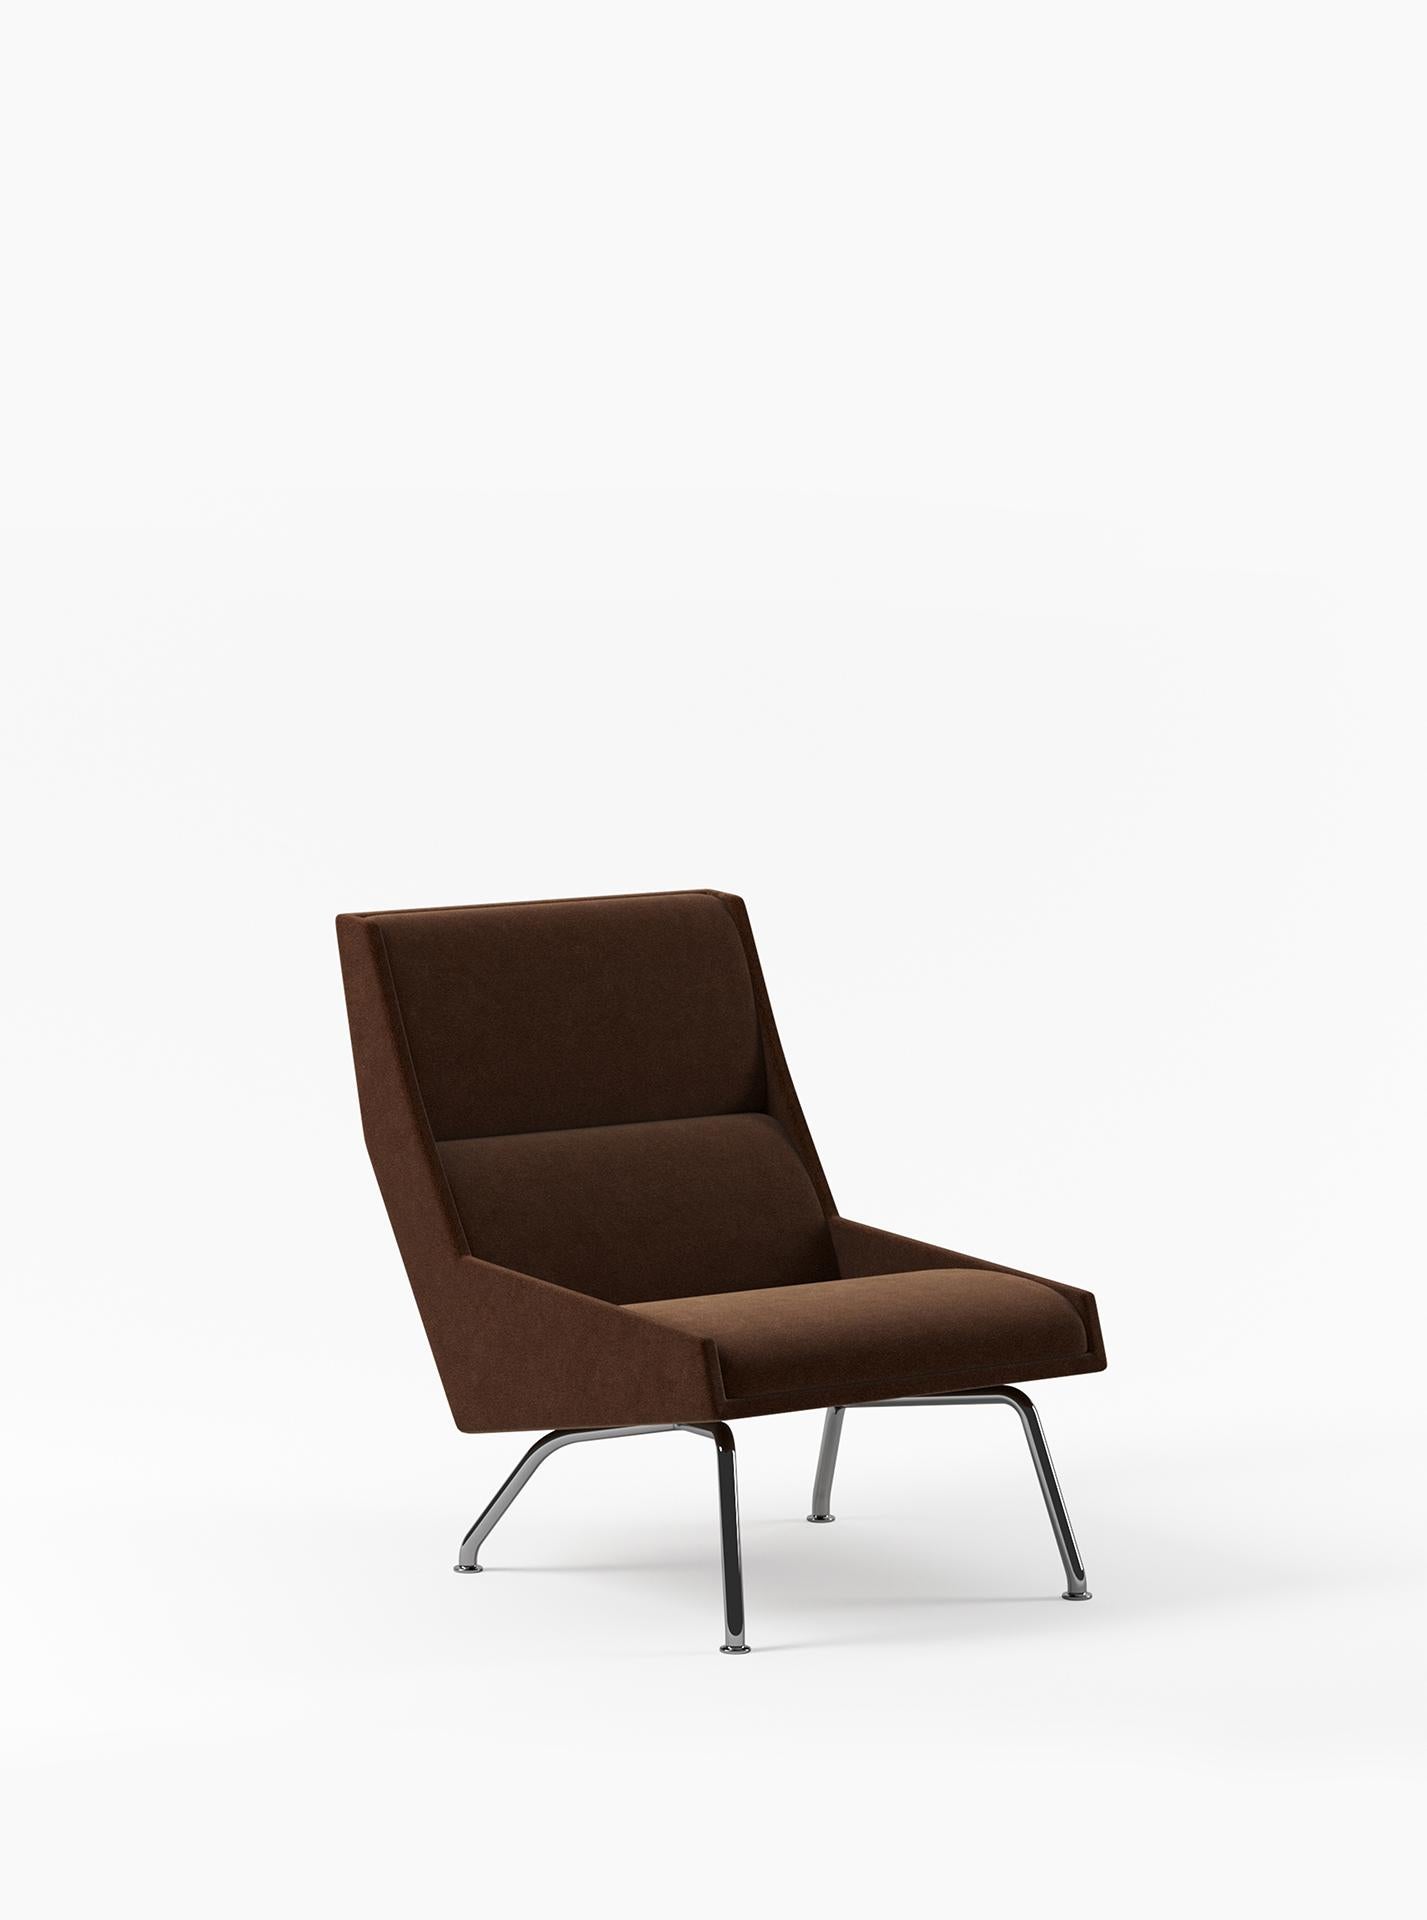 The Kent armchair is a testament to the artistry of form and fabrication. It embodies an elegant silhouette, drawing inspiration from the iconic elements of Italian 1950s design, including the angular lines of Gio Ponti's renowned 811 chair and the 